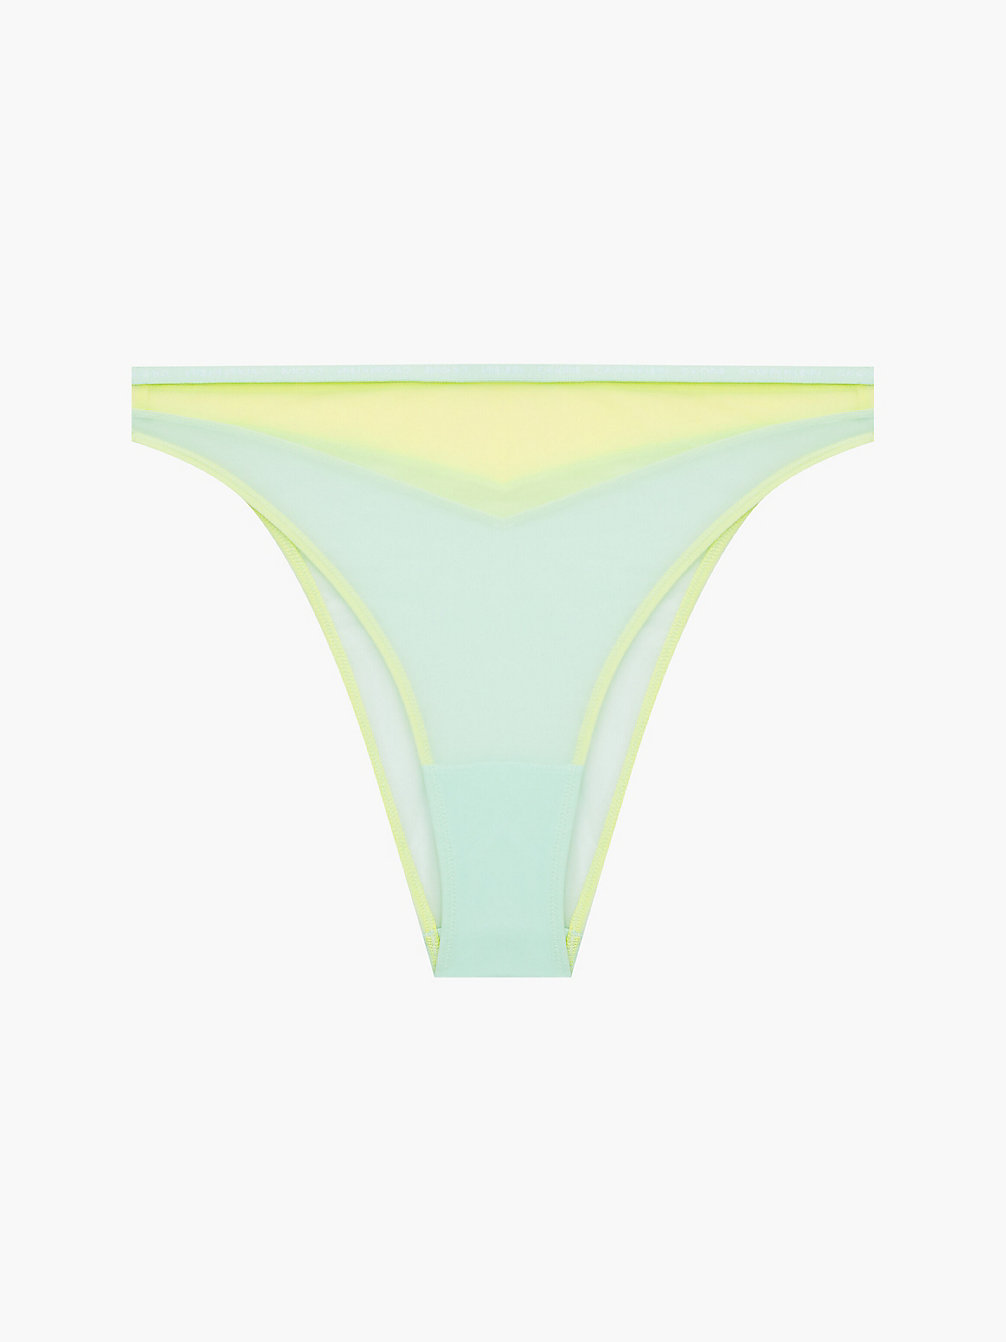 NEW YELLOW High Waisted Tanga - Pride undefined women Calvin Klein